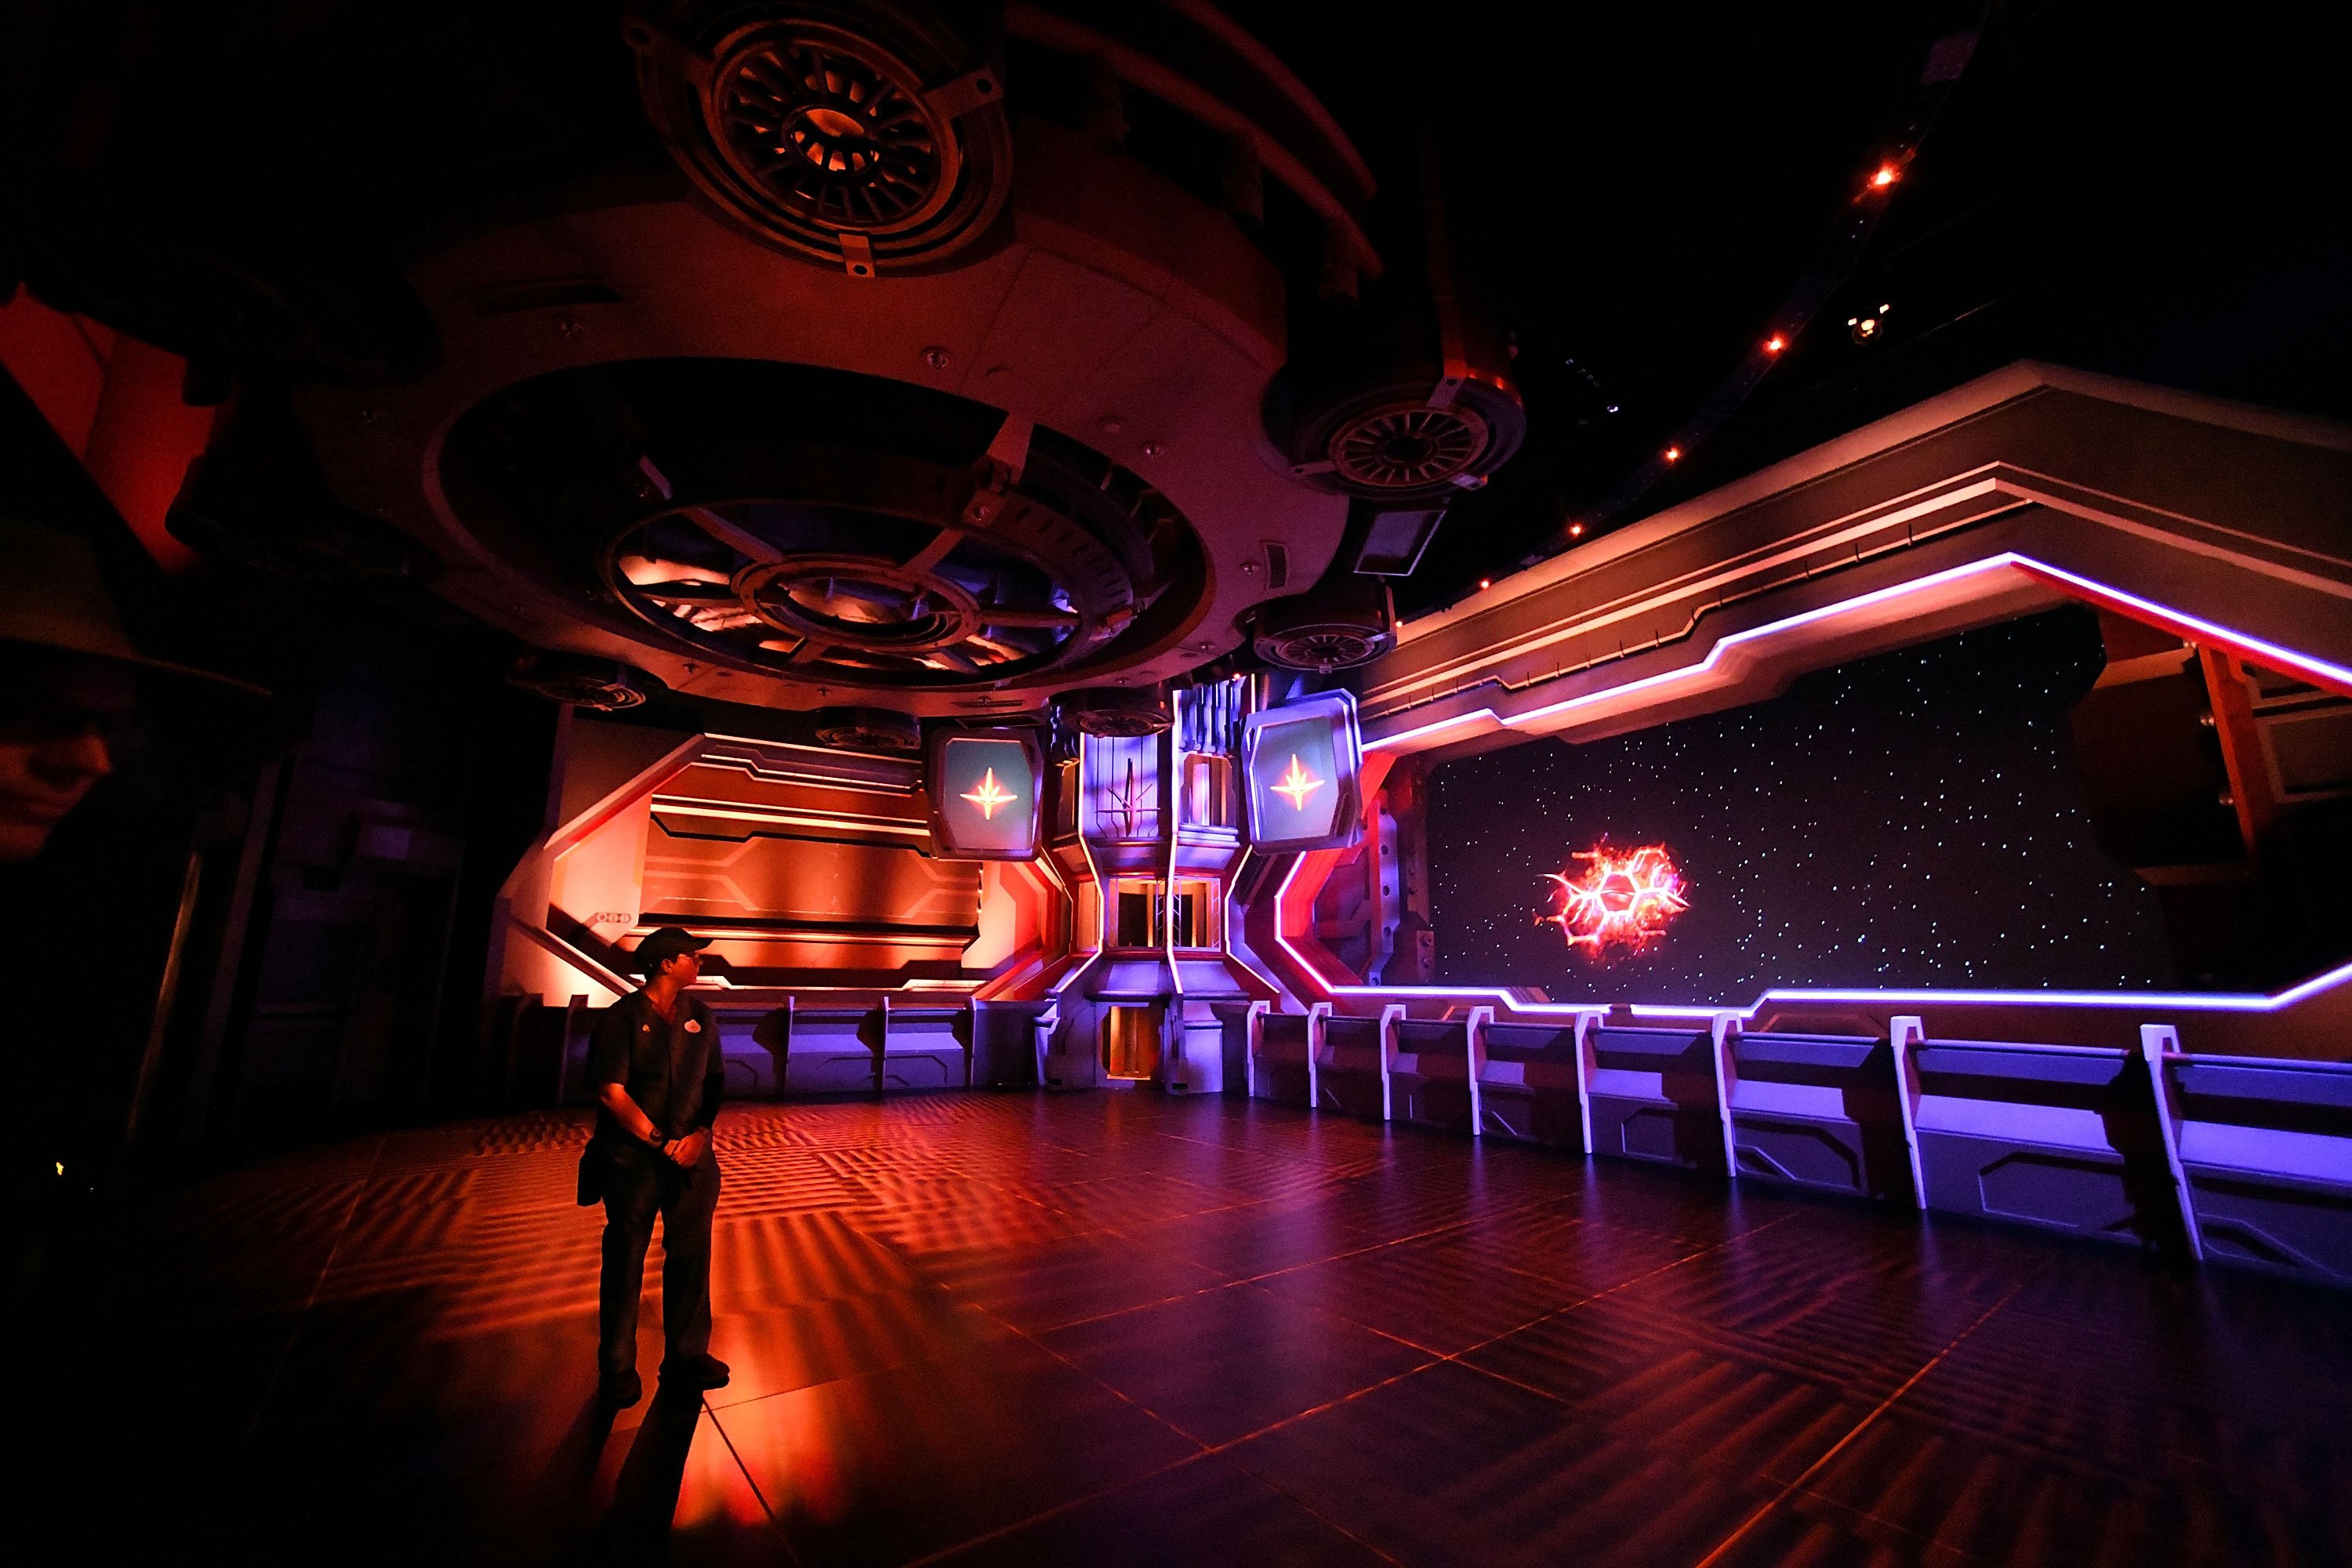 'Guardians of the Galaxy: Cosmic Rewind' Disney's new ride during a media preview event at Epcot Center at Walt Disney World